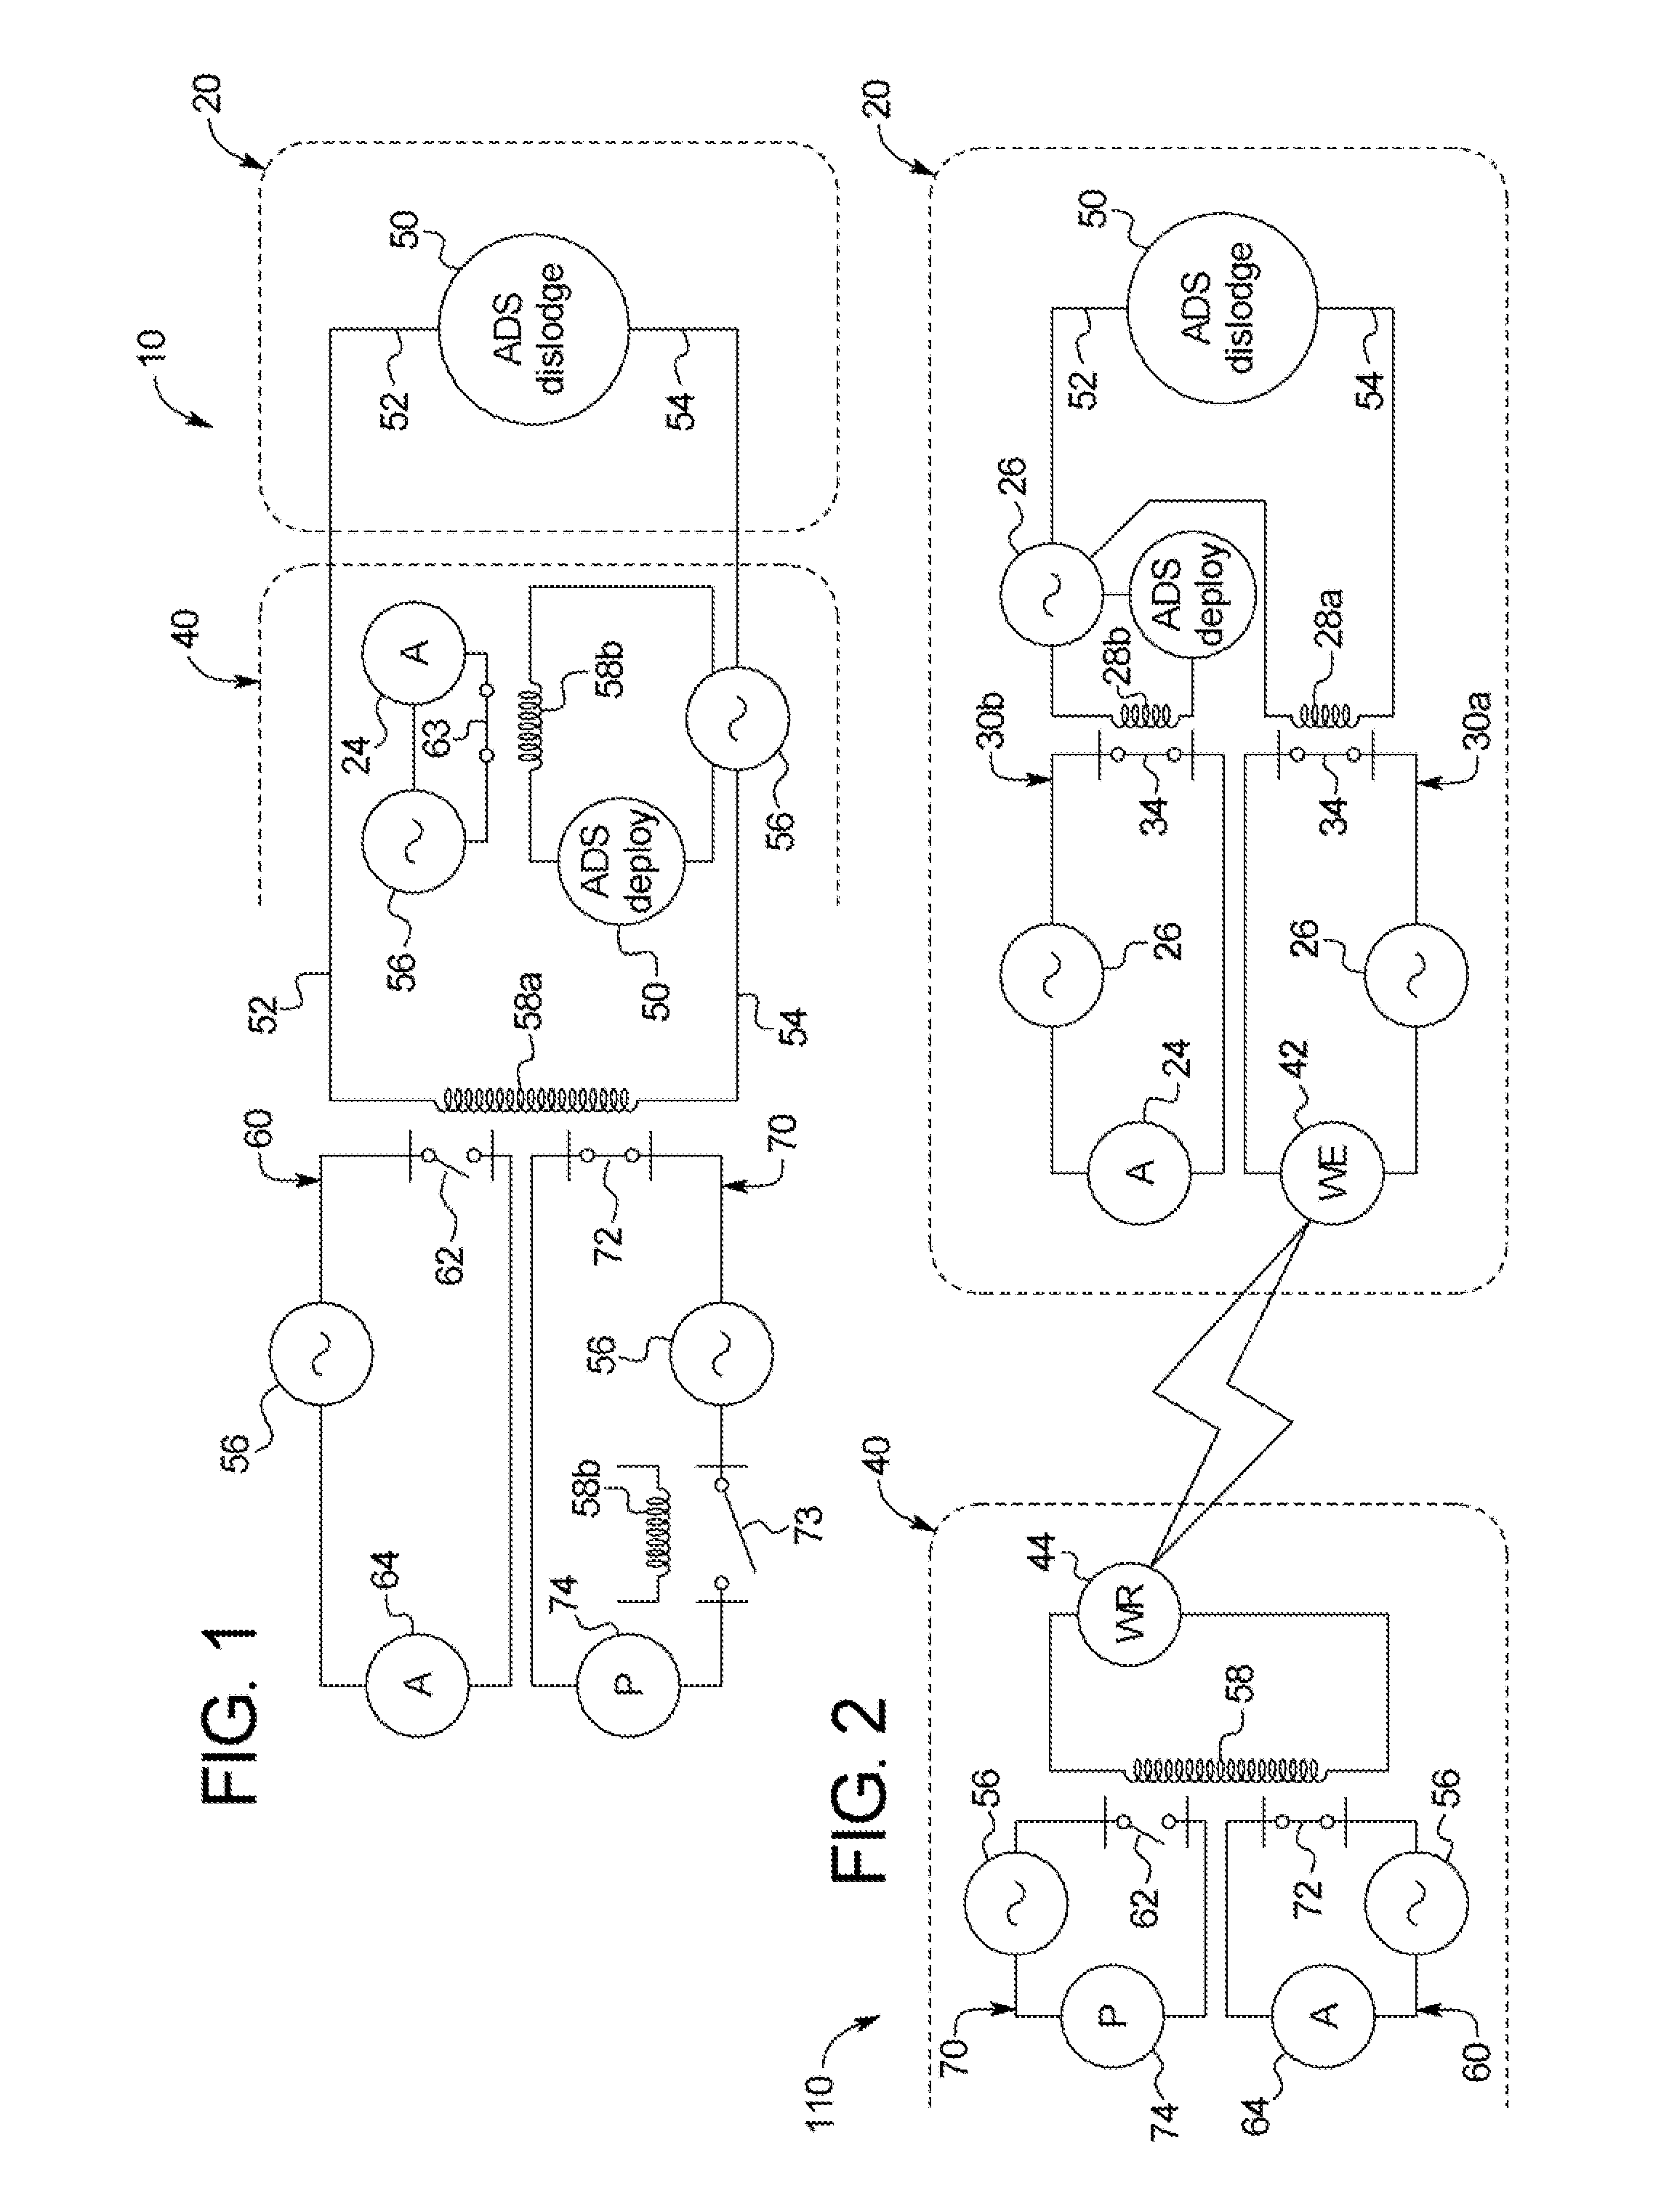 Needle placement detection and security device and method